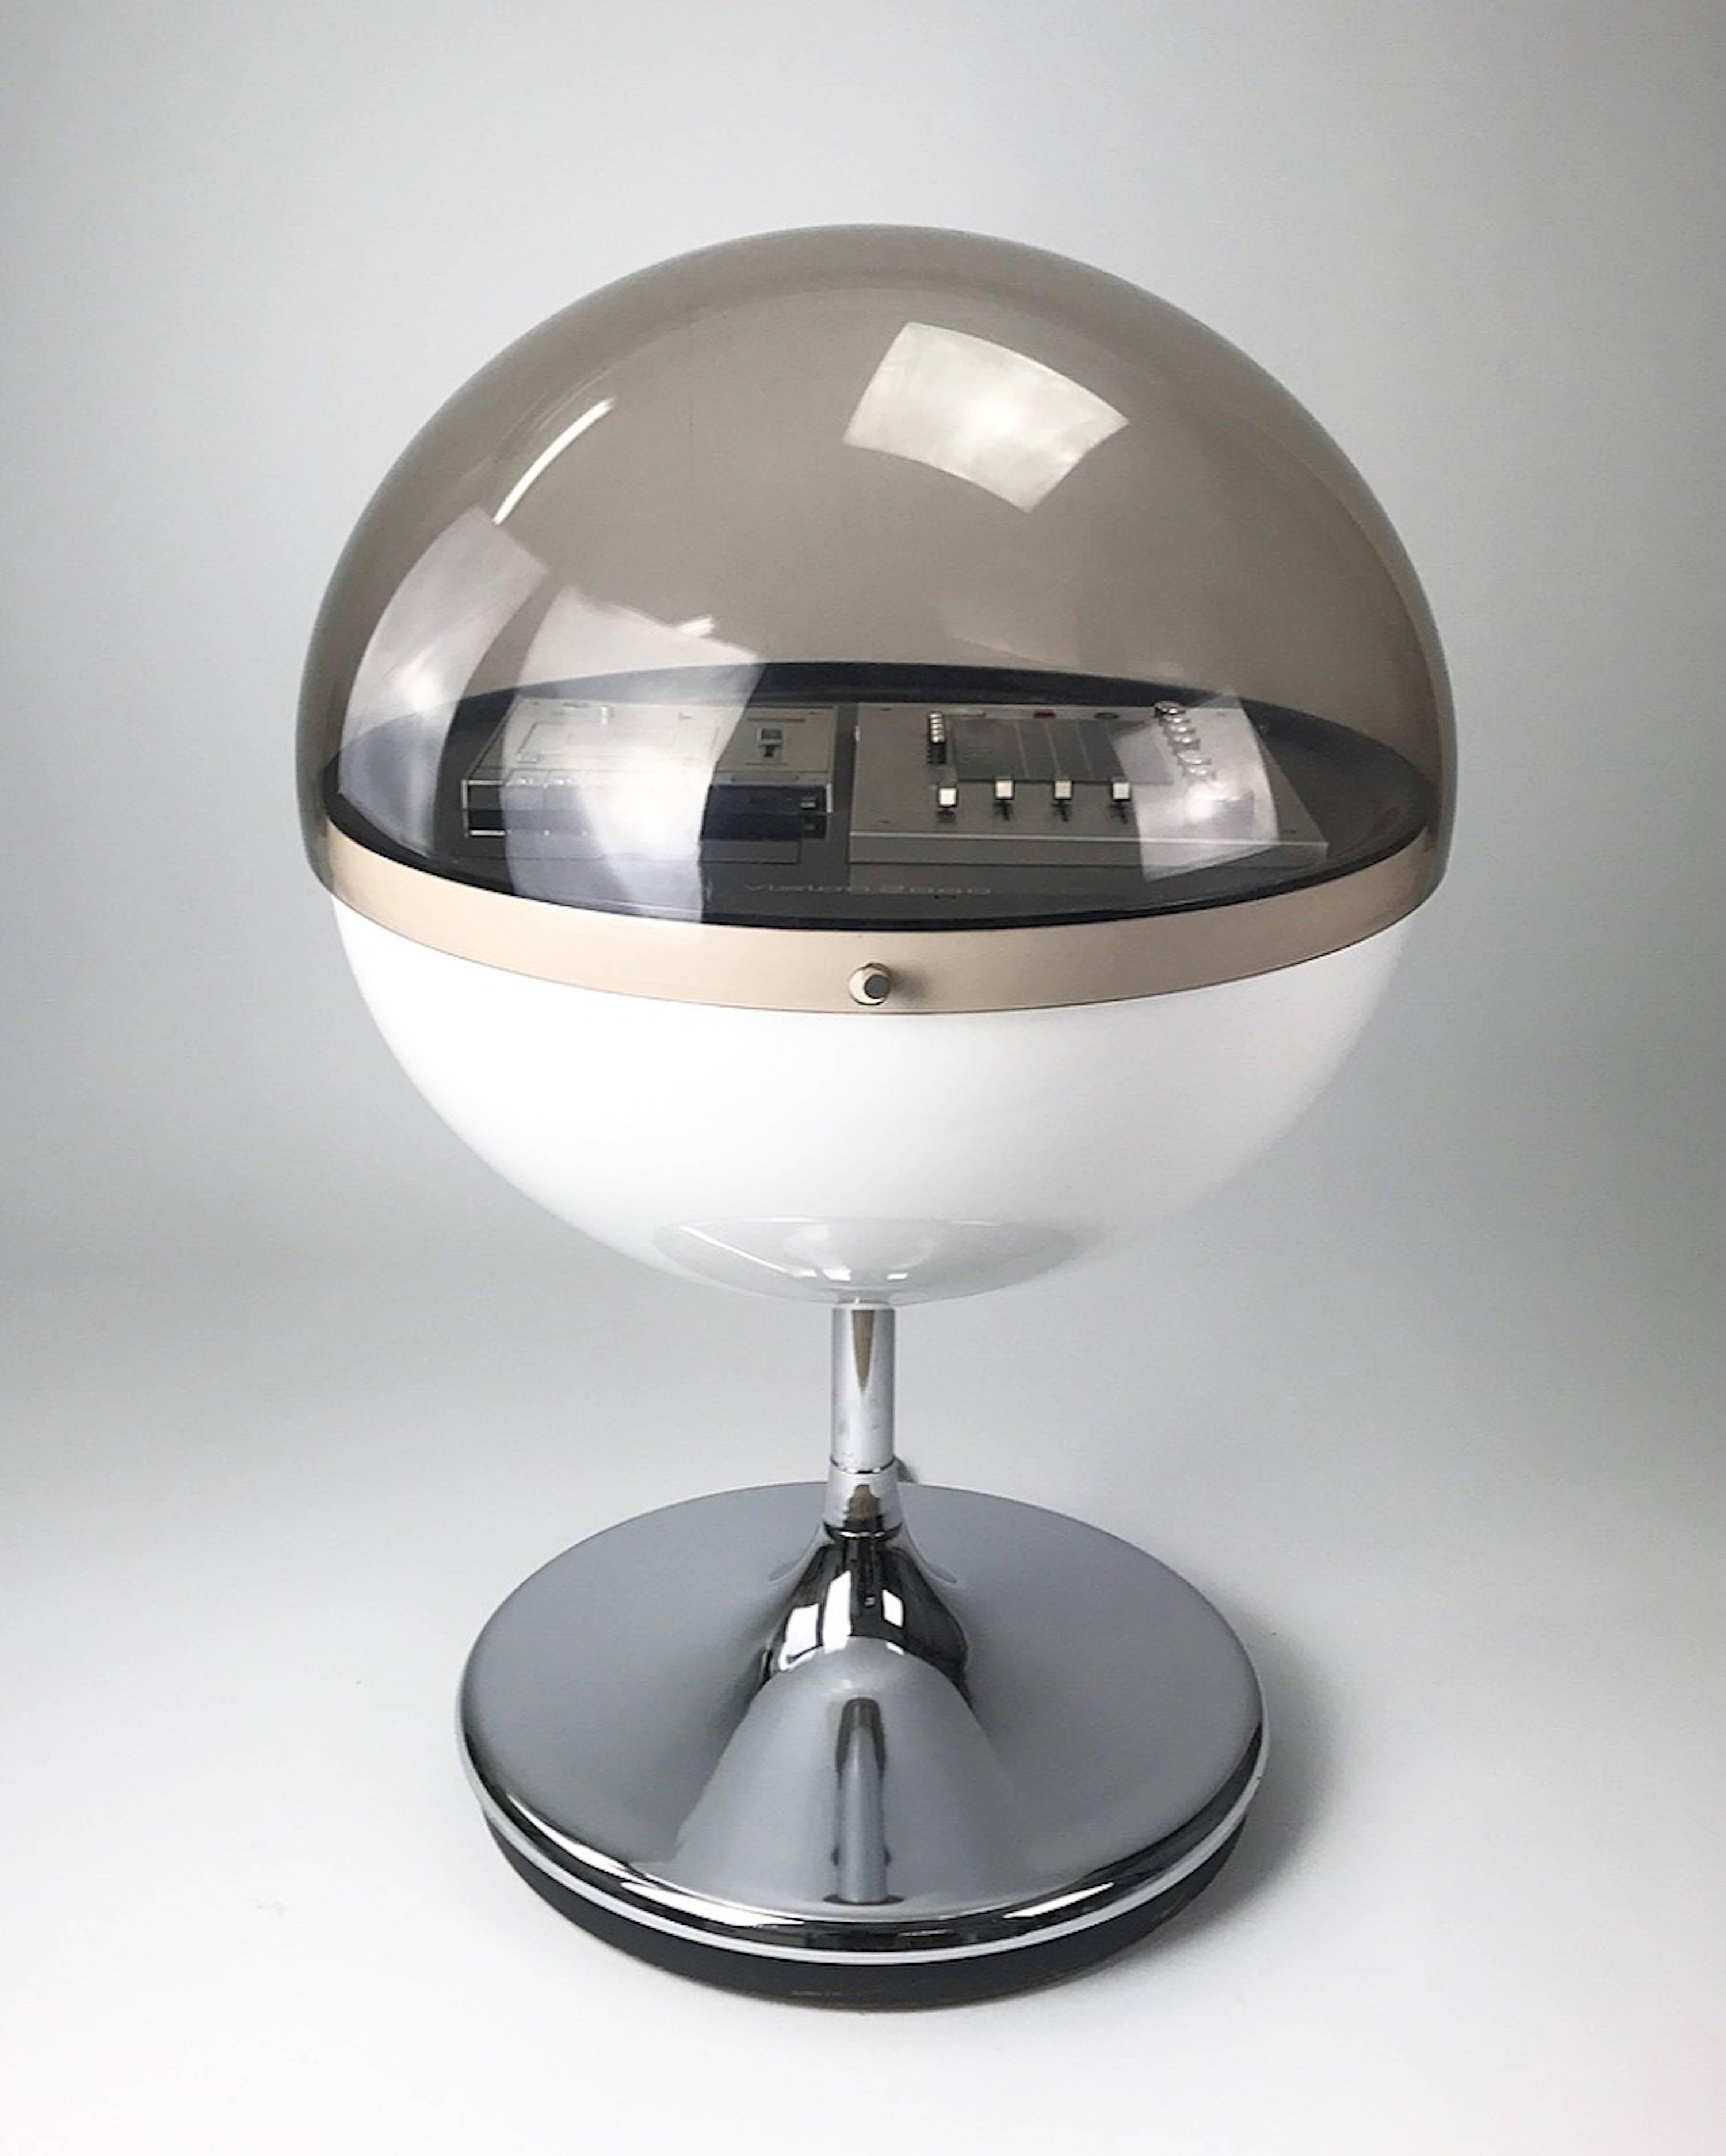 One of the most iconic design pieces from the Space Age era is this Vision 2000 Hi-Fi system by Rosita designed by renowned Thilo Oerke 1971.

The spherical soundsystem on a chrome tulip base combined with the Grundig Audiorama 7000 speakers which